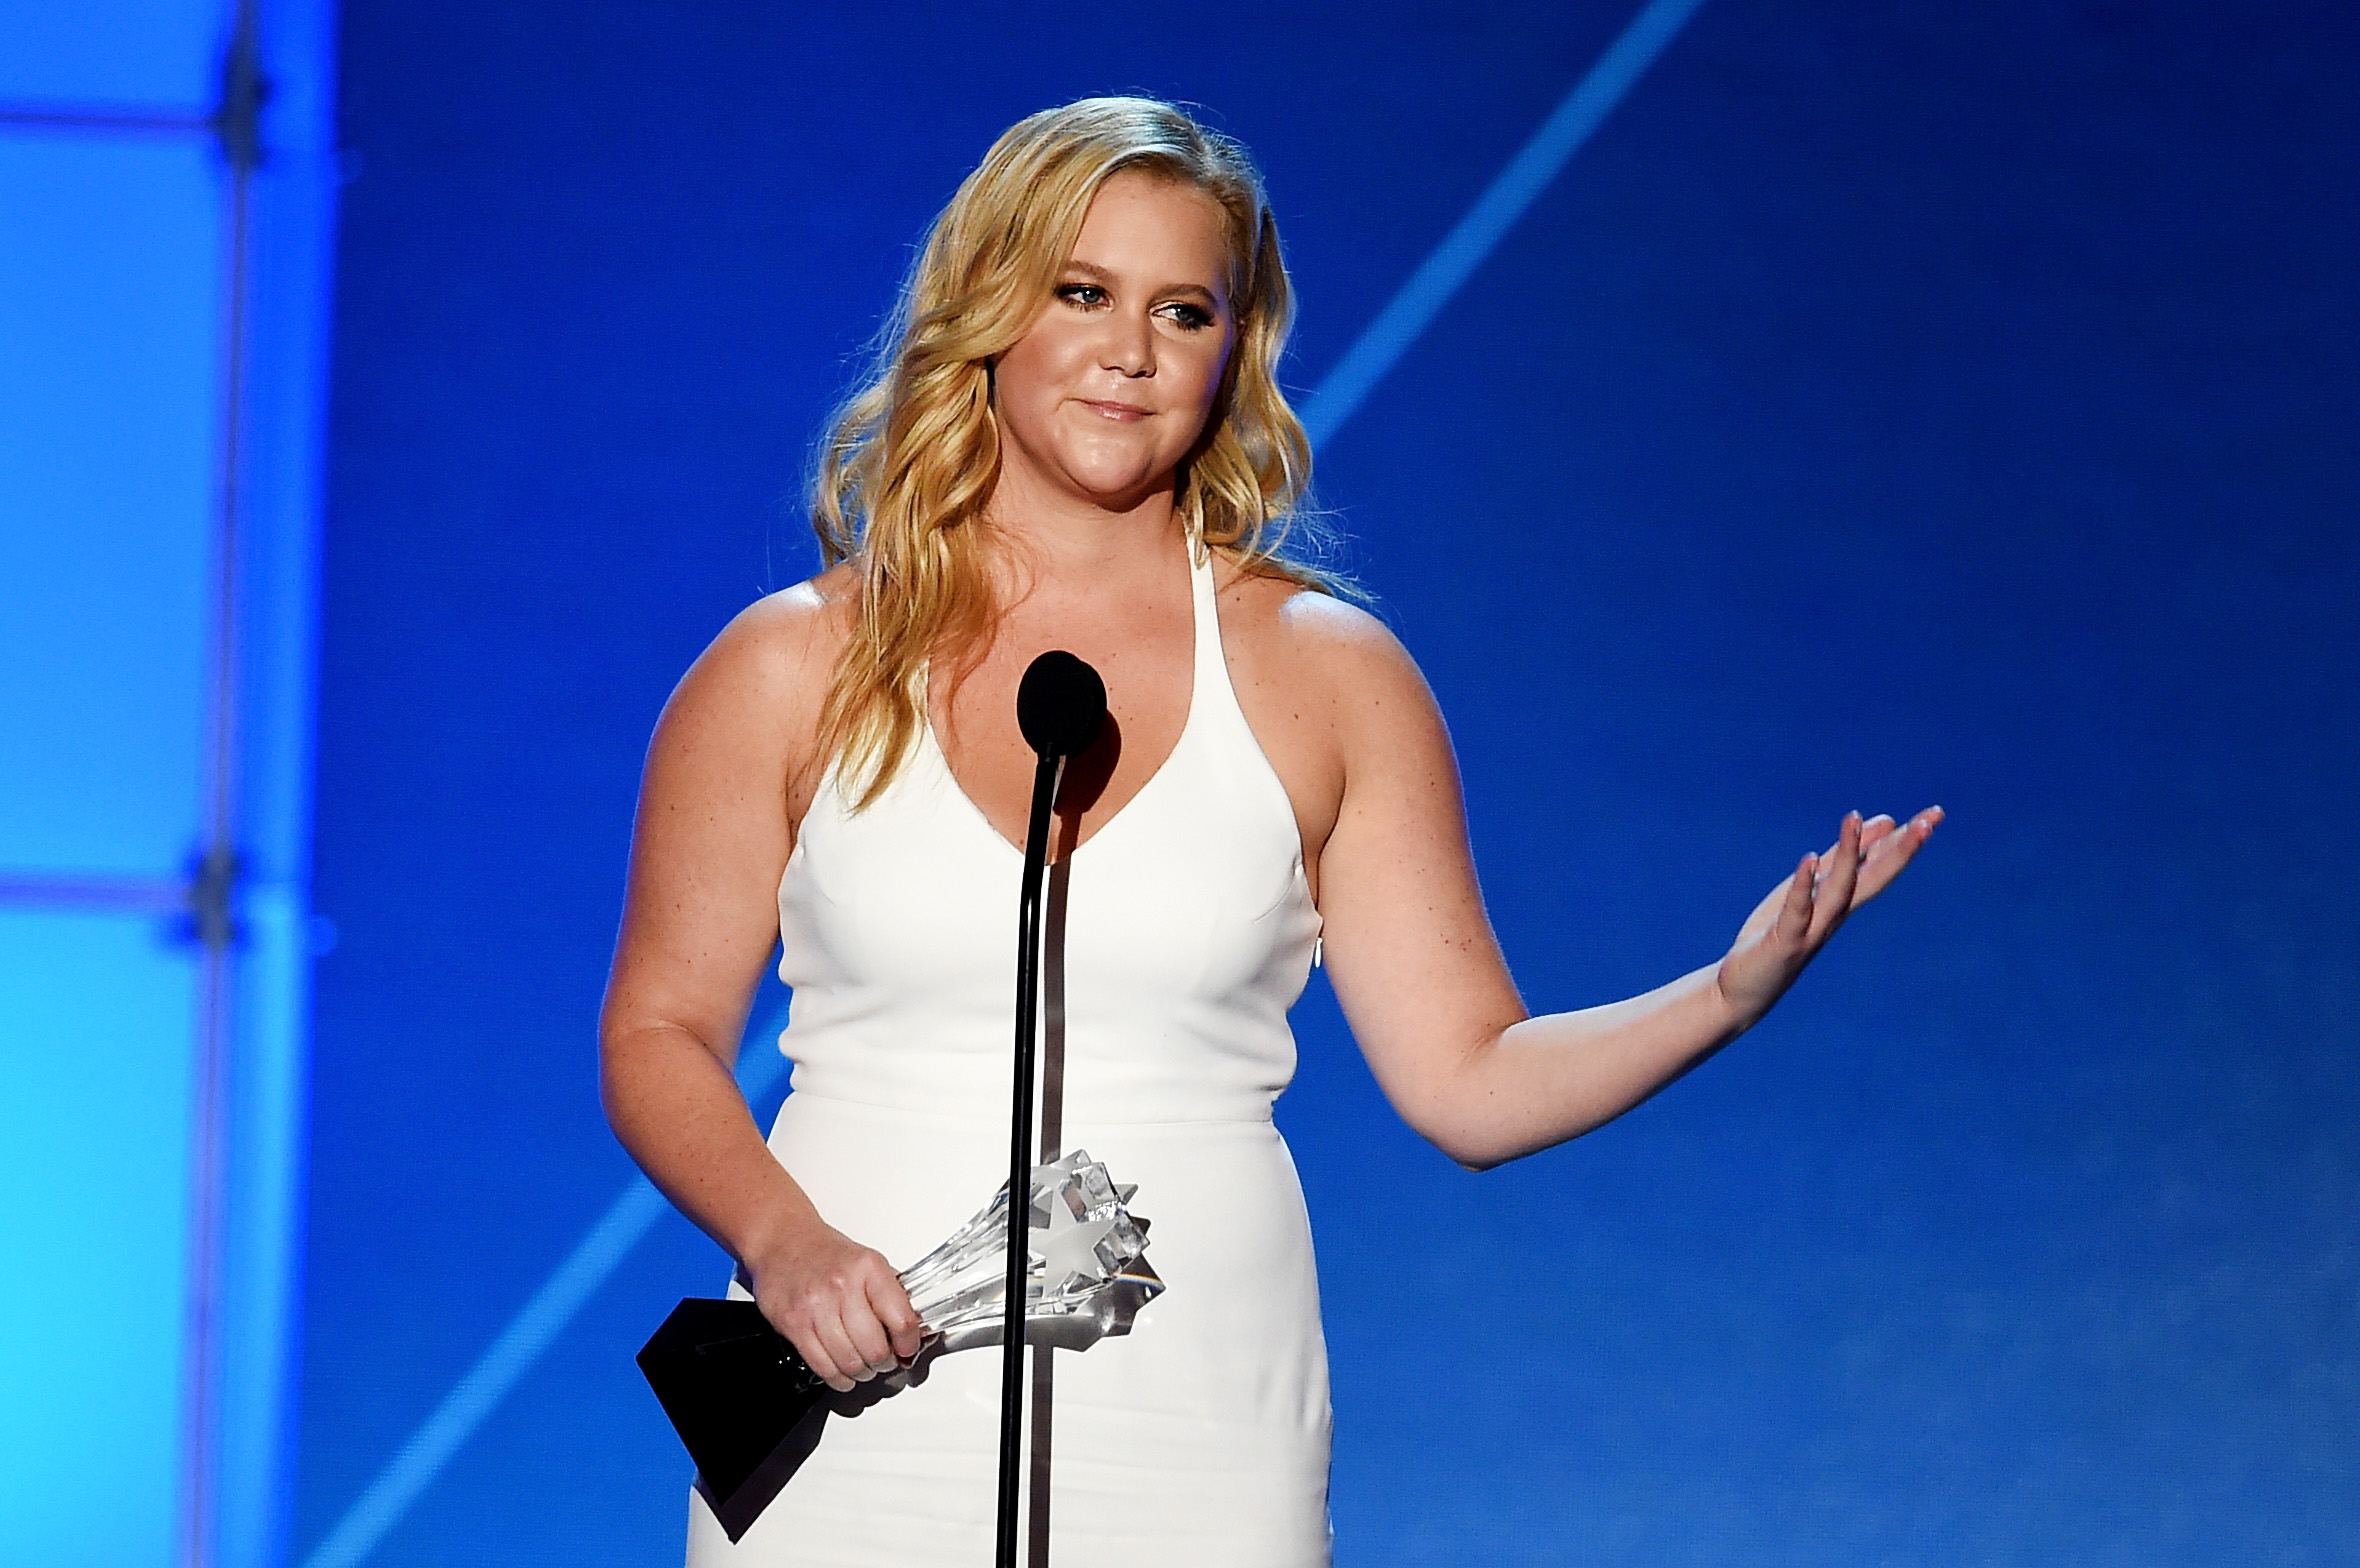 speaks onstage during the 21st Annual Critics' Choice Awards at Barker Hangar on January 17, 2016 in Santa Monica, California.